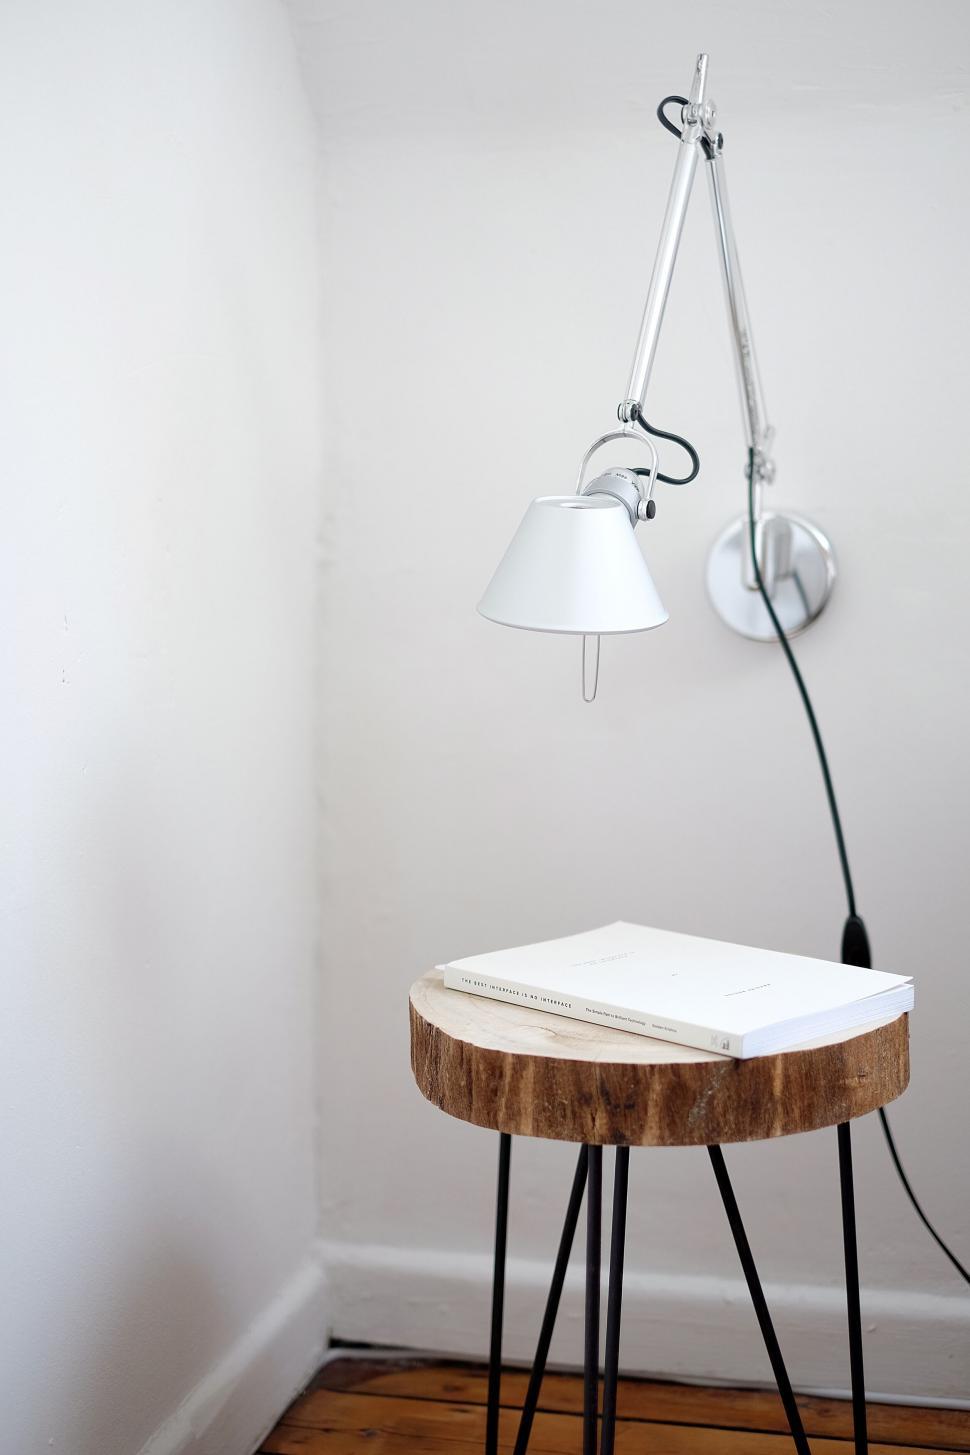 Free Image of A lamp on a table 